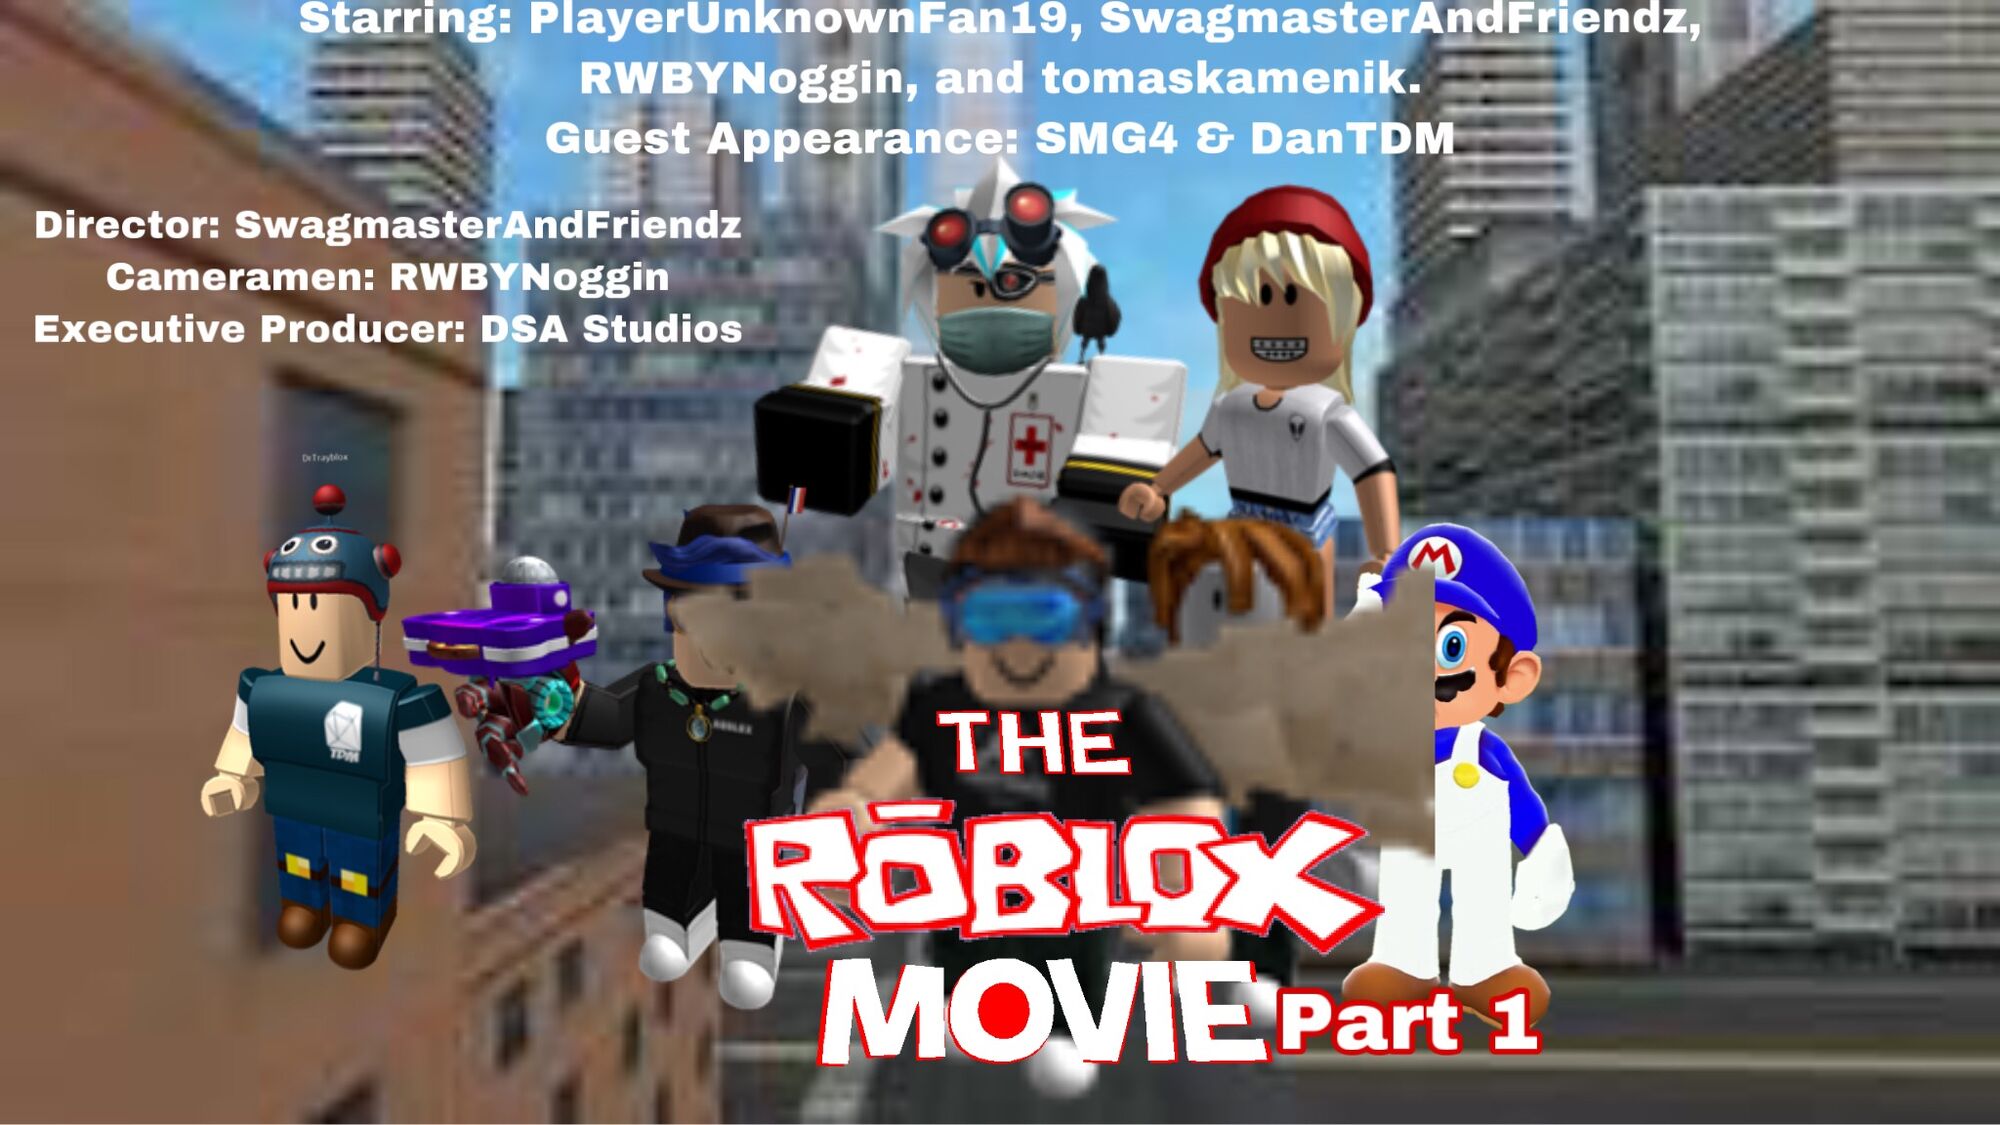 The Crusher Roblox Wikia Fandom Powered By Wikia Danielarnoldfoundation Org - roblox star wars shirt template span get robux90 m span